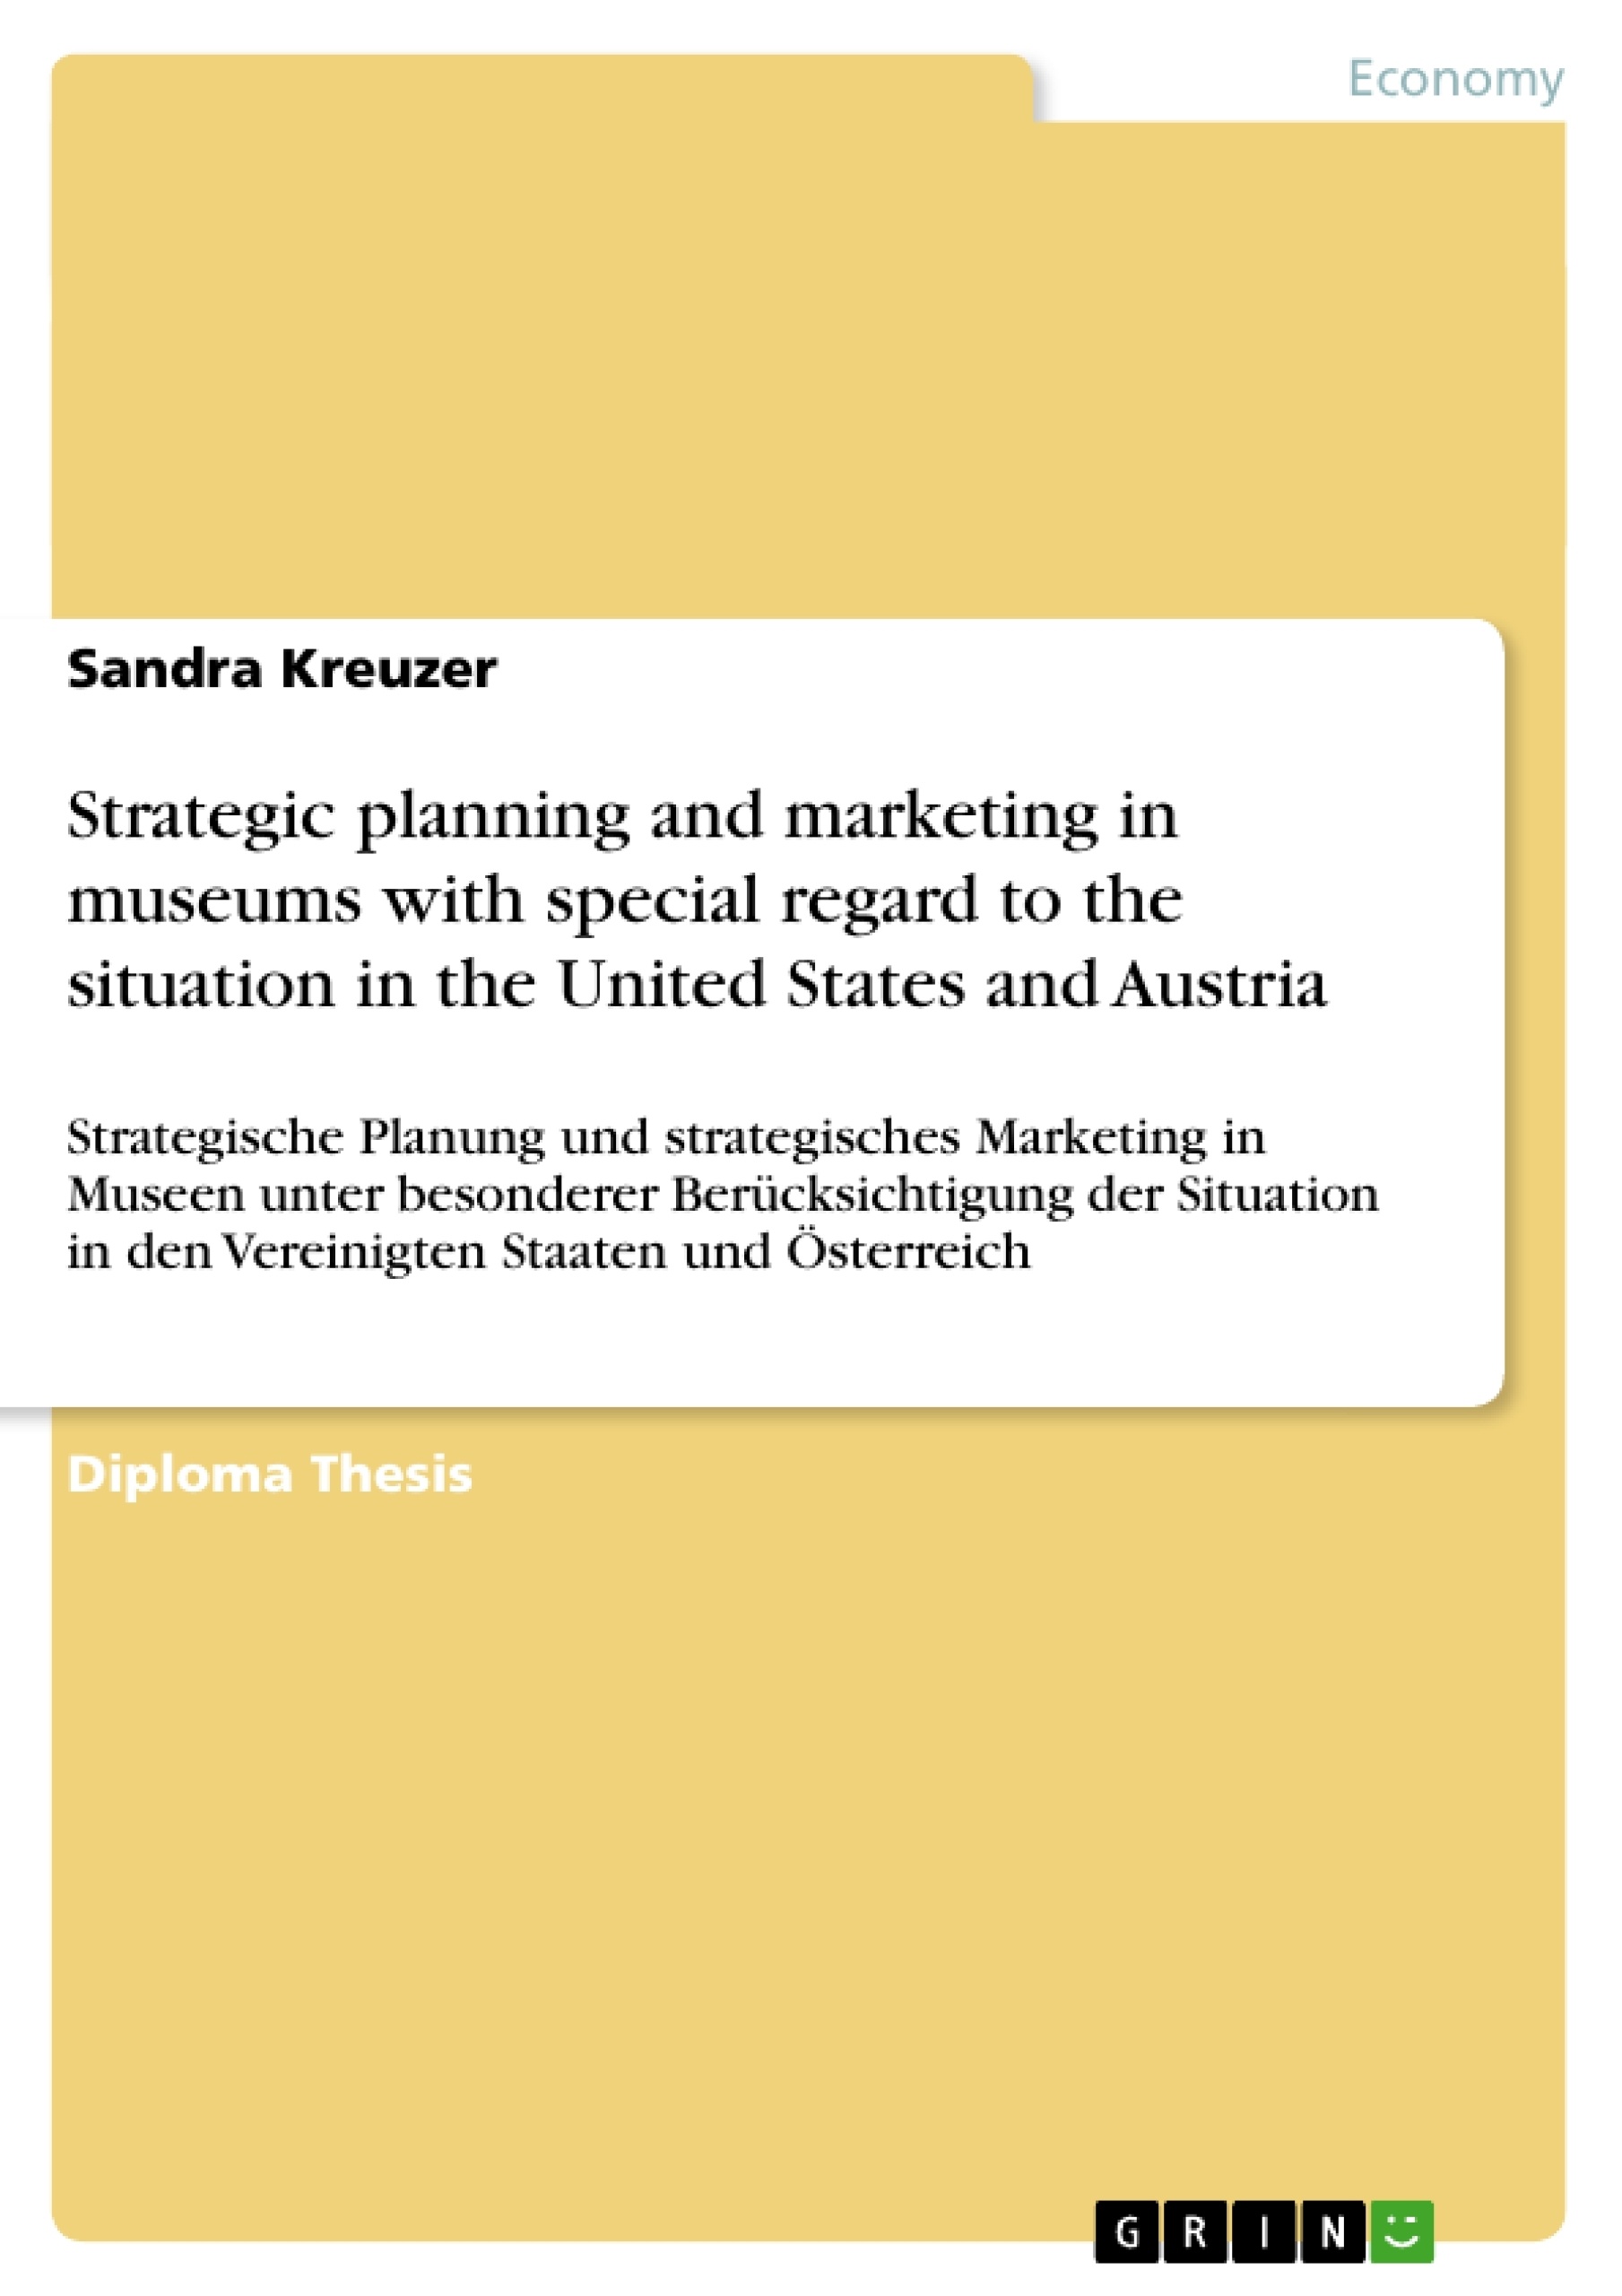 Título: Strategic planning and marketing in museums with special regard to the situation in the United States and Austria